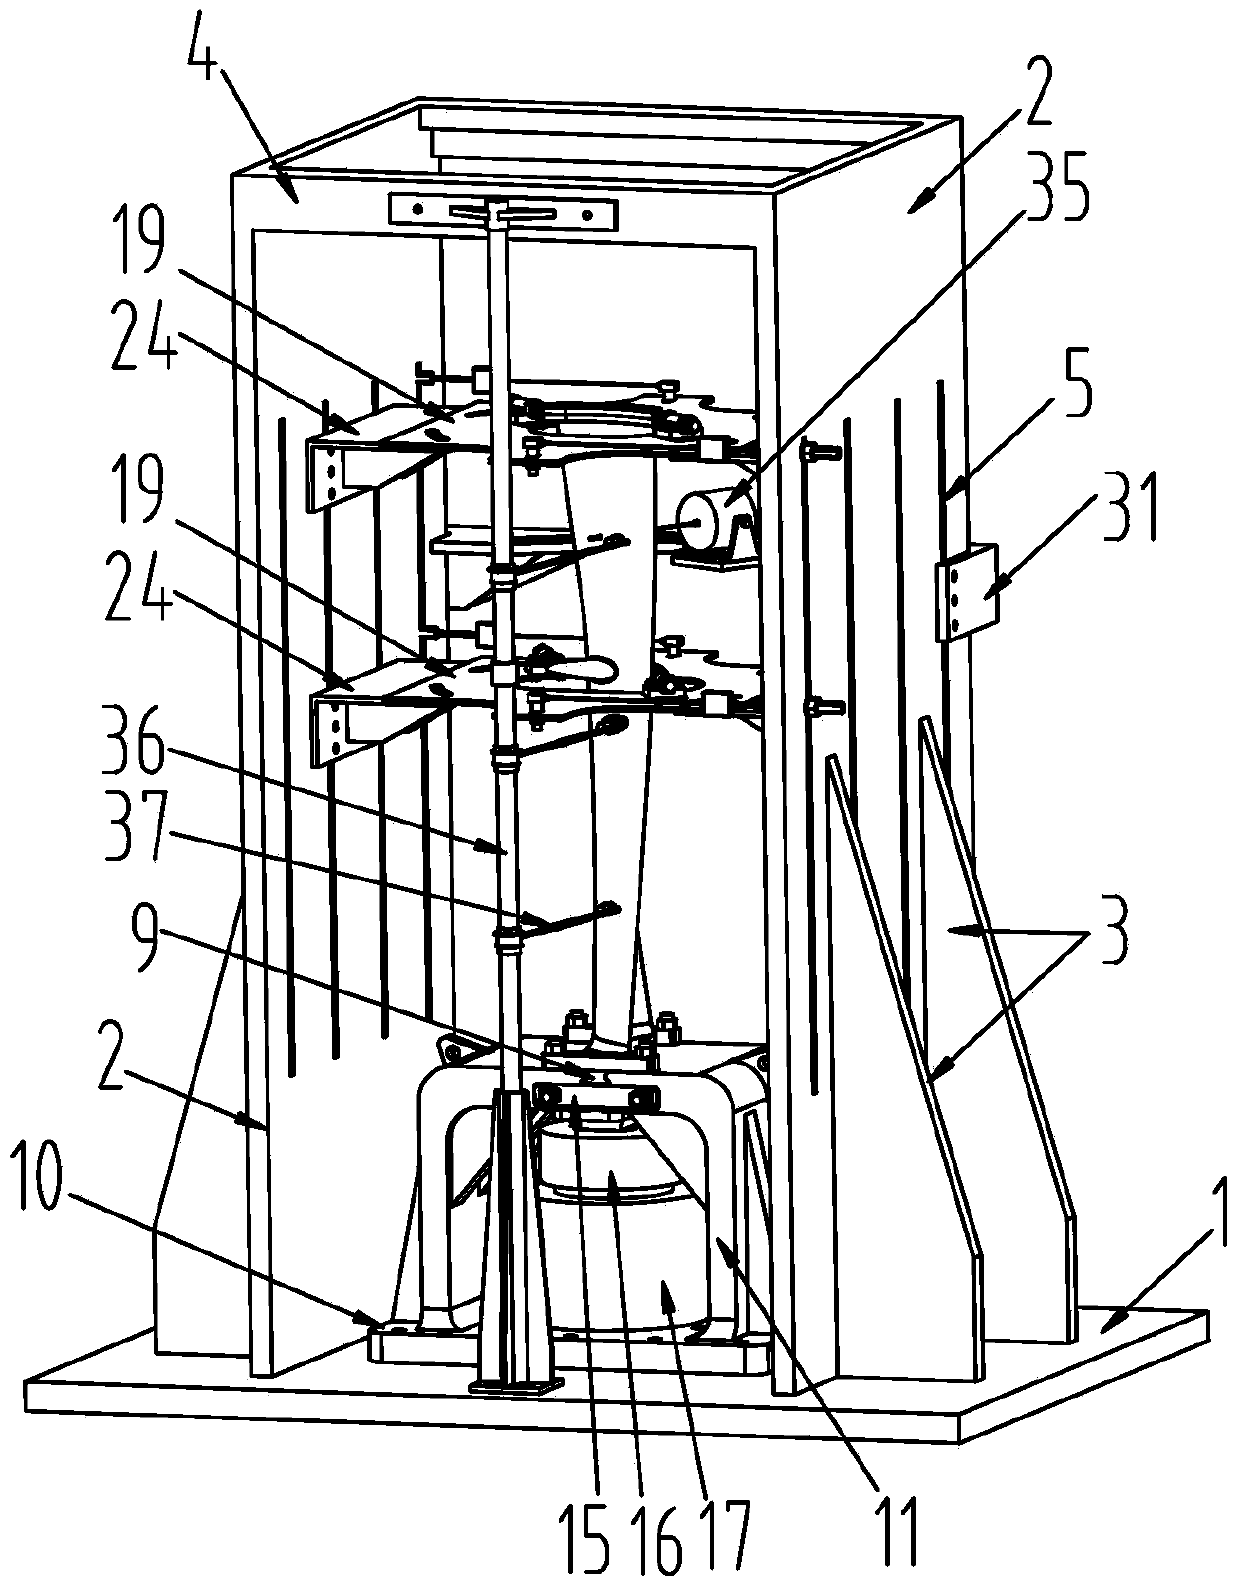 Testing apparatus for steam turbine blade with shroud ring and boss lashing wire structures